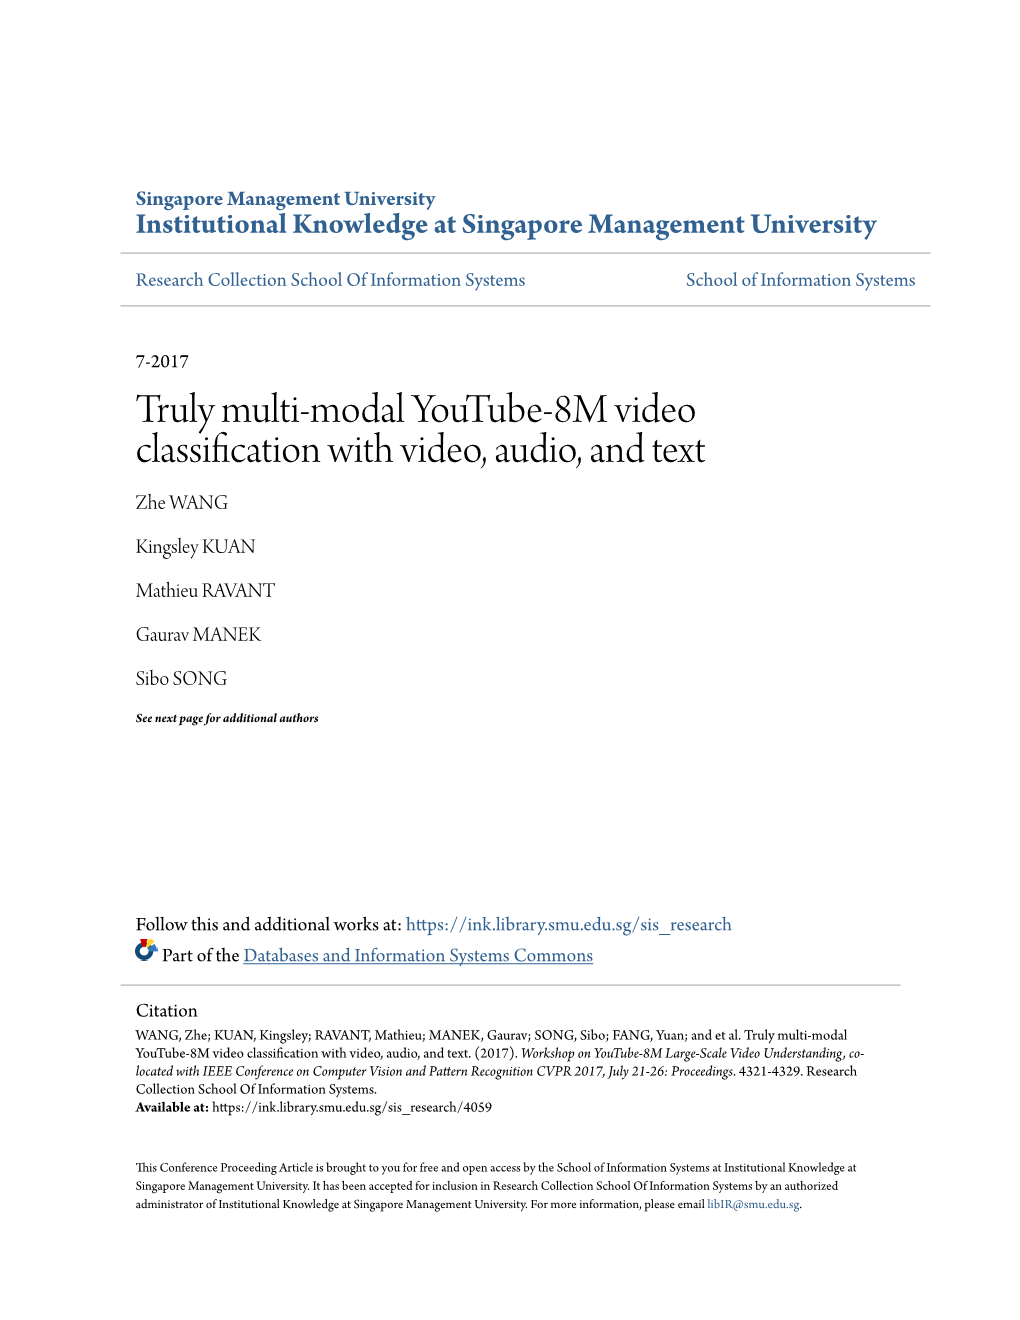 Truly Multi-Modal Youtube-8M Video Classification with Video, Audio, and Text Zhe WANG